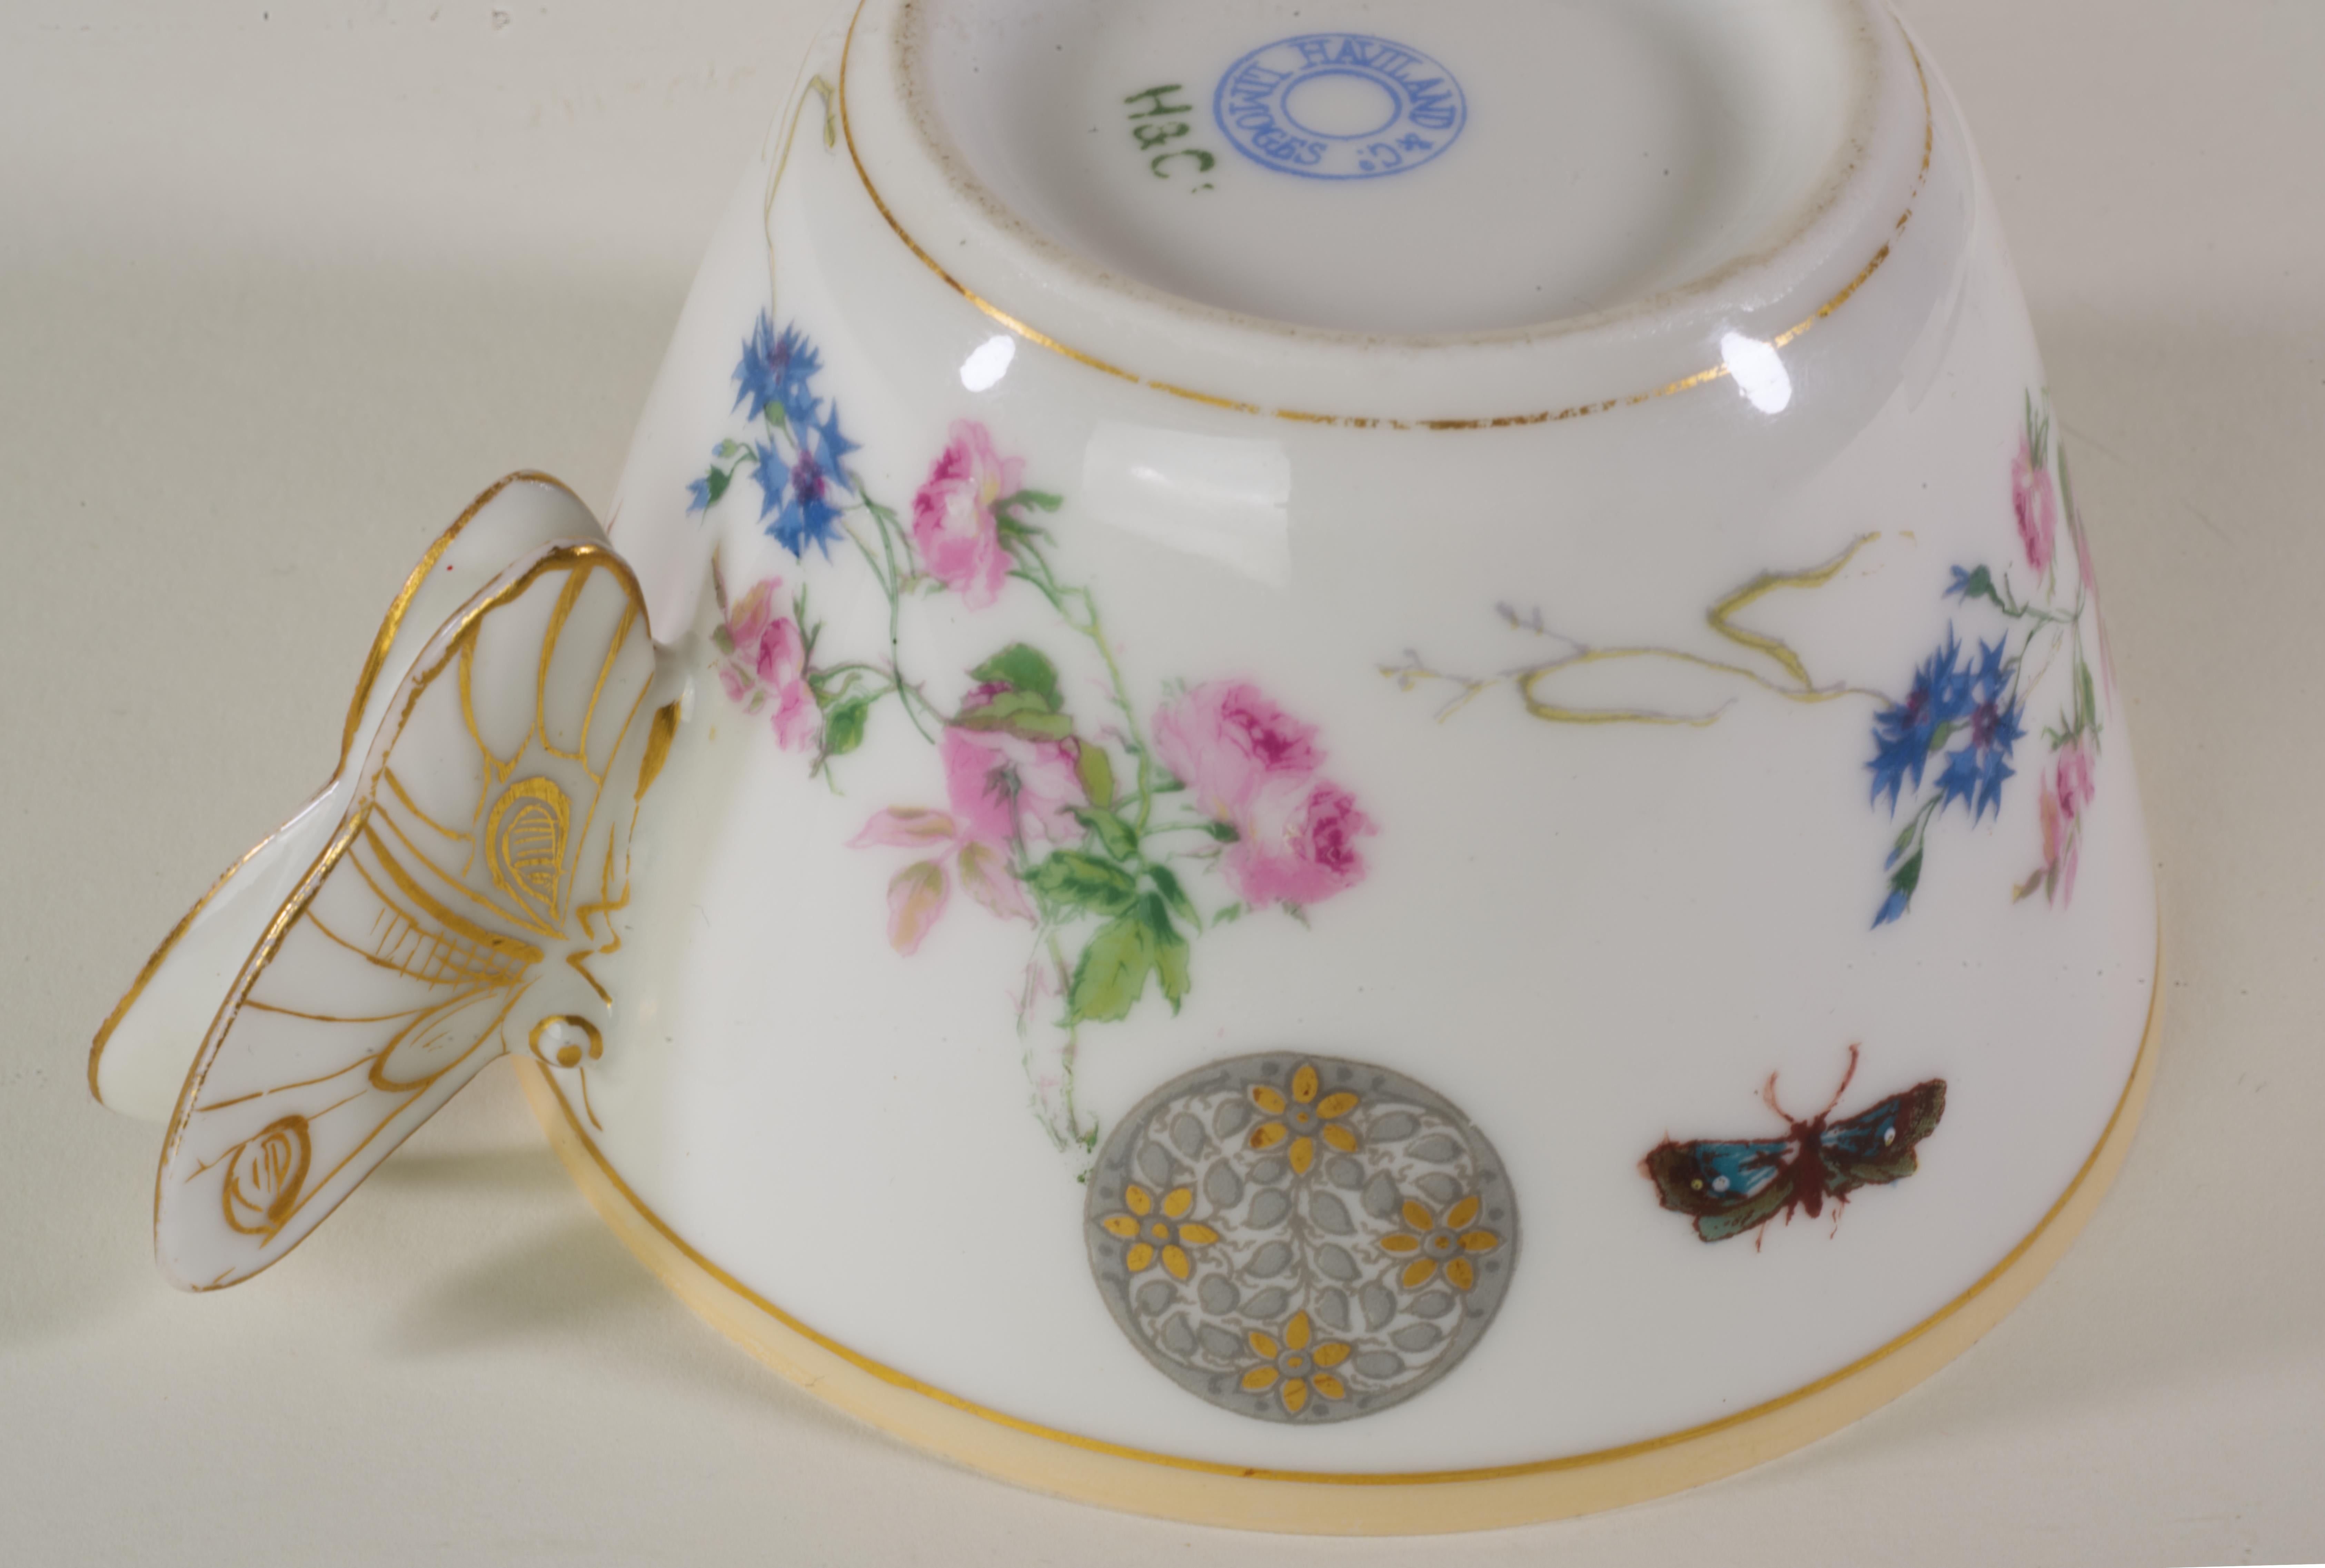 Haviland Limoges Butterfly Handled Cup and saucer set, 1879-1889, Aesthetic  For Sale 7